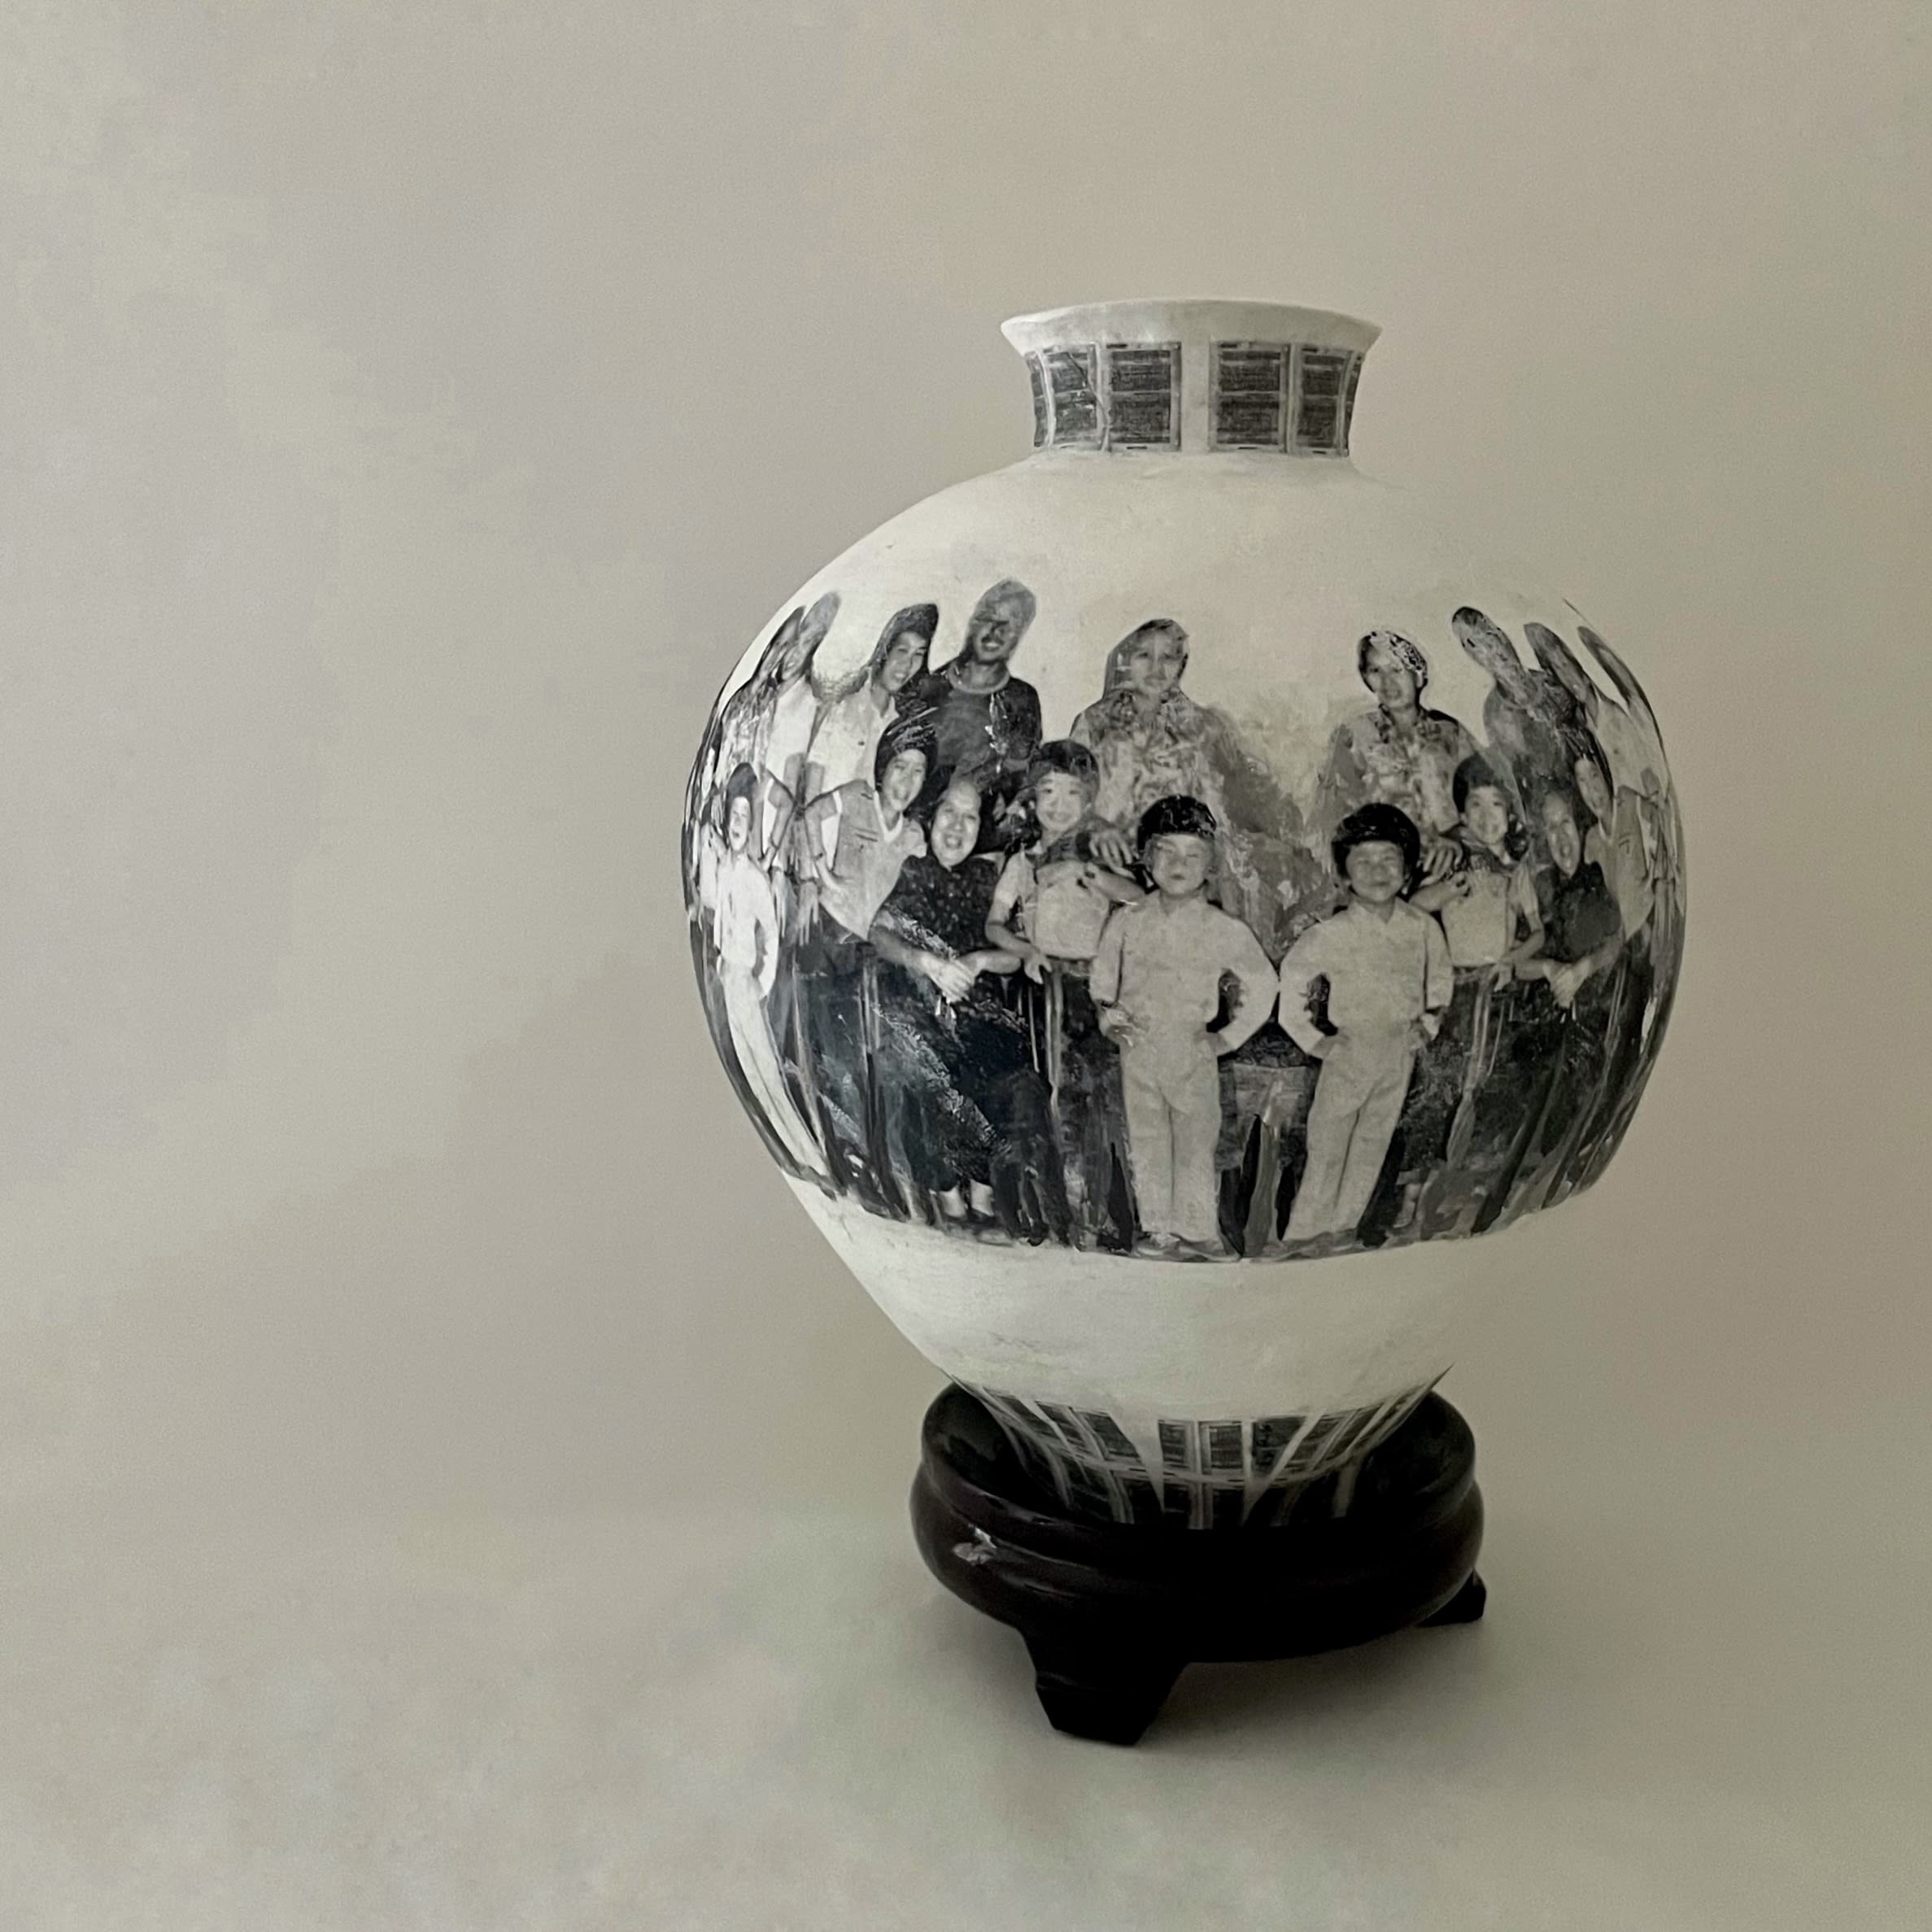 A clay pot with portraits of a family printed onto it